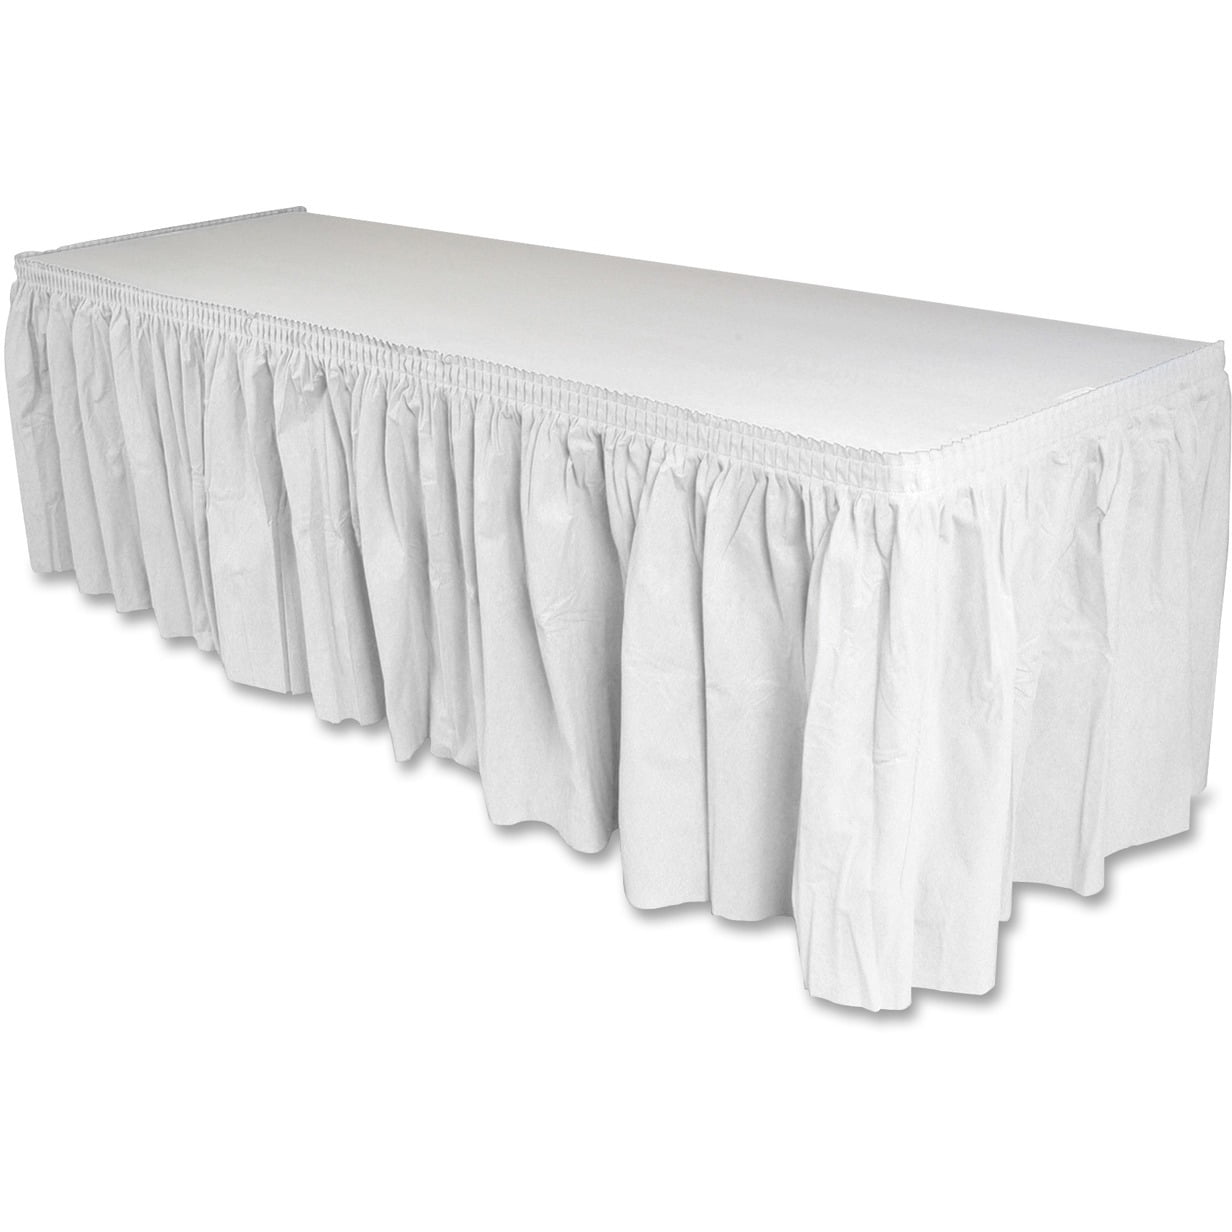 SimplyPoly Shirred Pleat Polyester Table Skirting In 13+ Colors 21 ft 